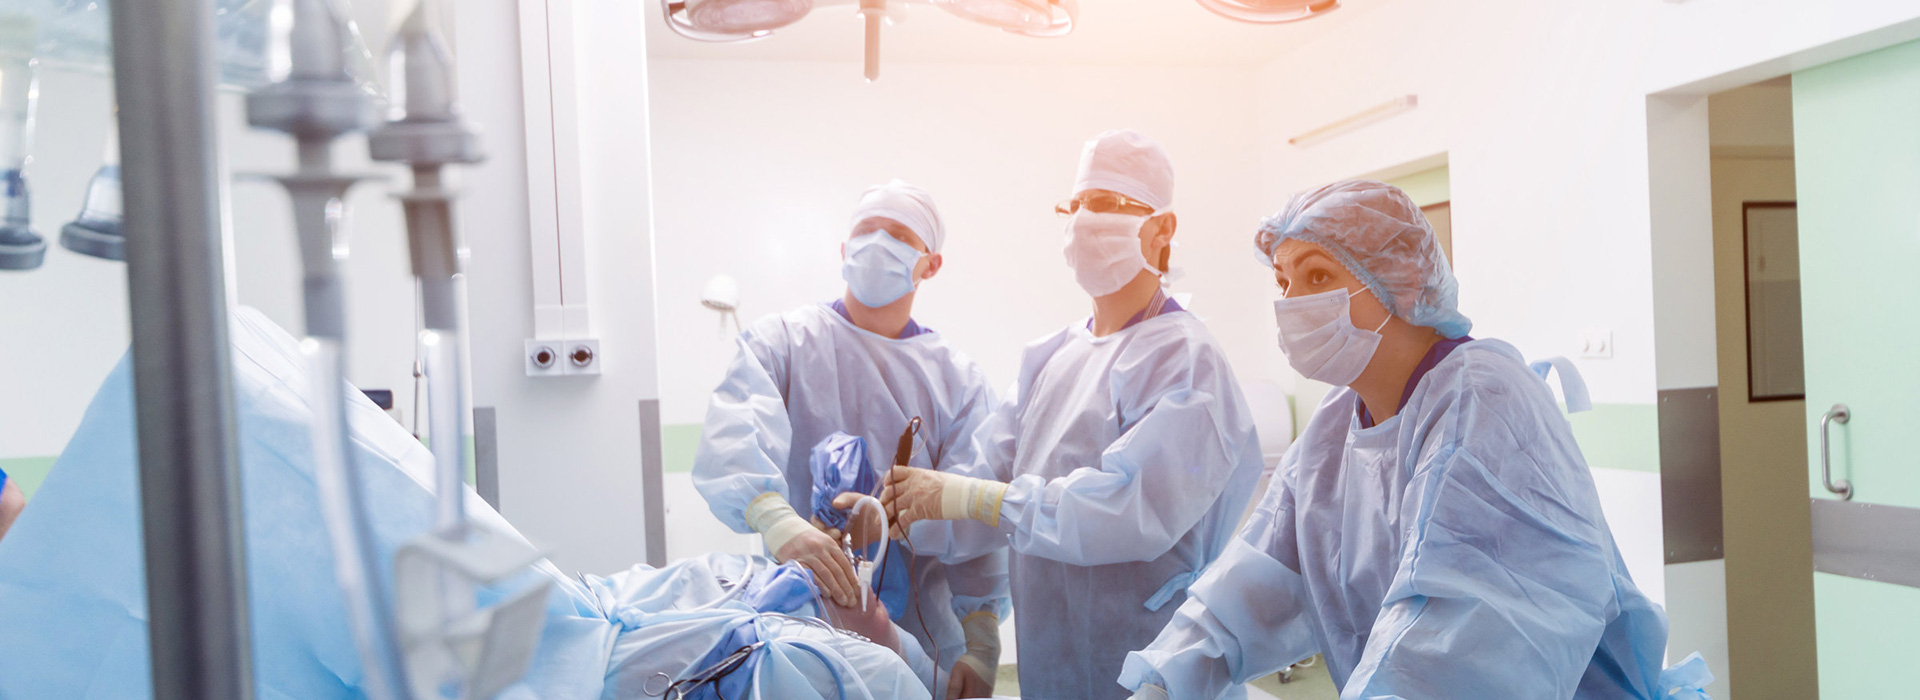 Pic of Surgical Team in Operating Room Performing Procedure on Omega Medical Solutions About Page